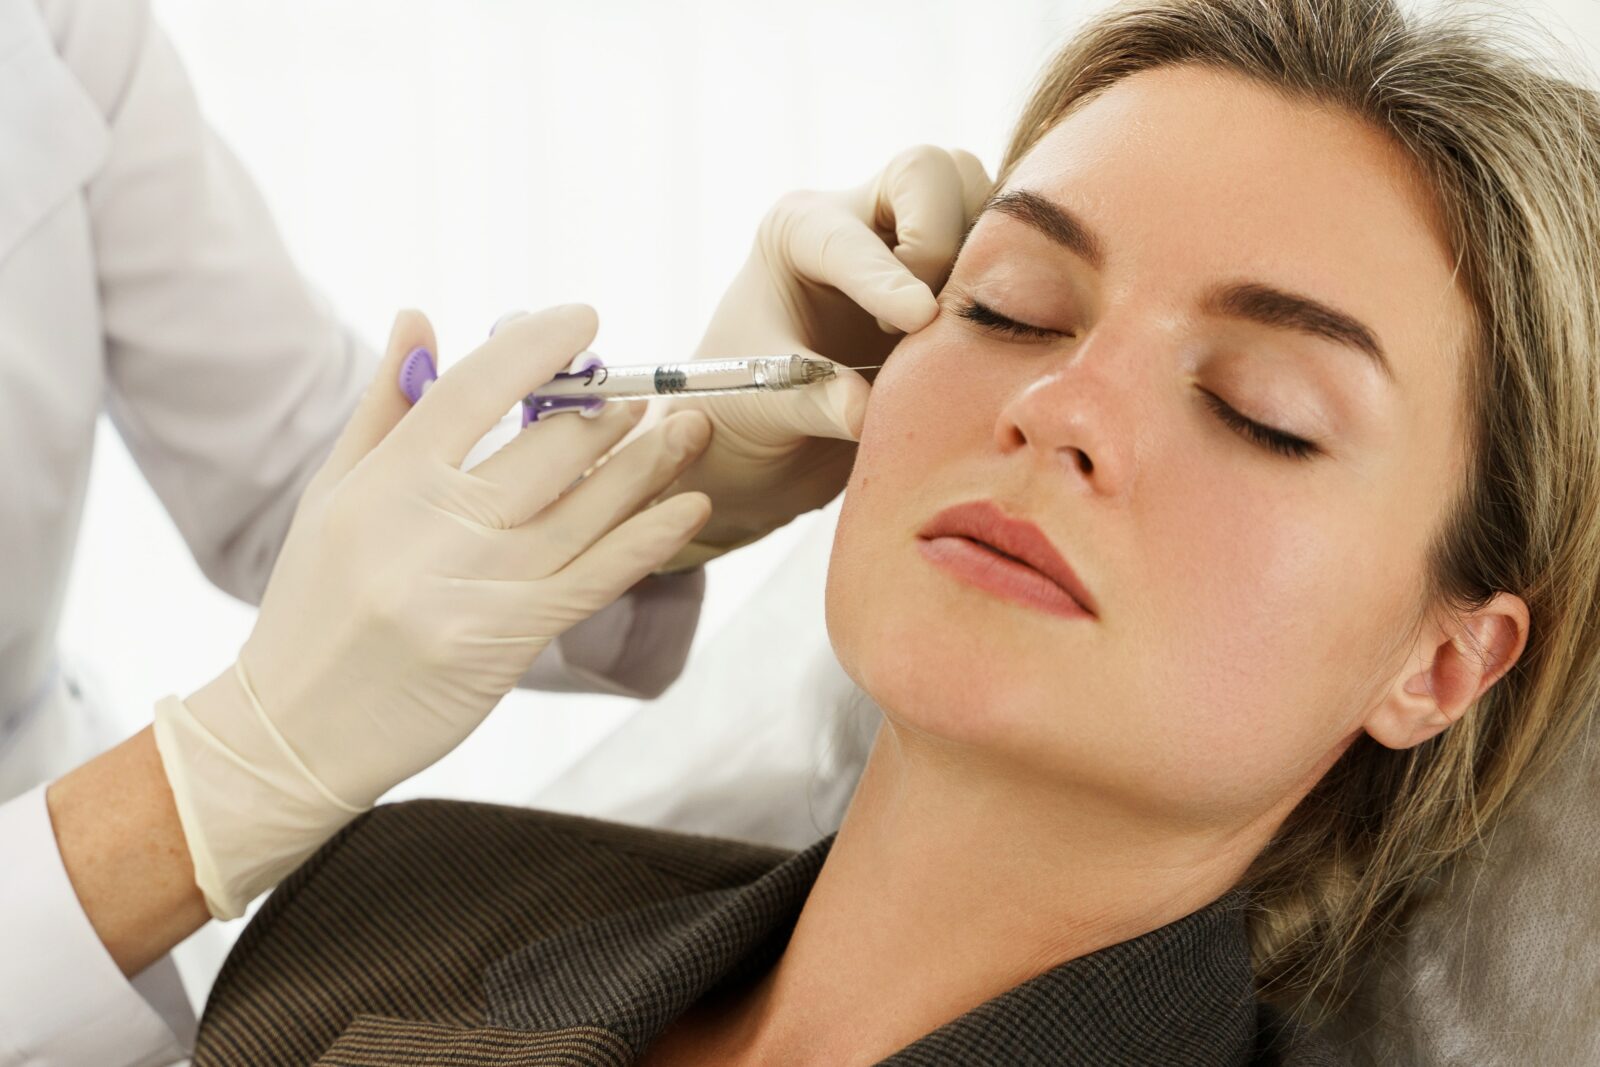 Female client during facial filler injections in aesthetic medical clinic